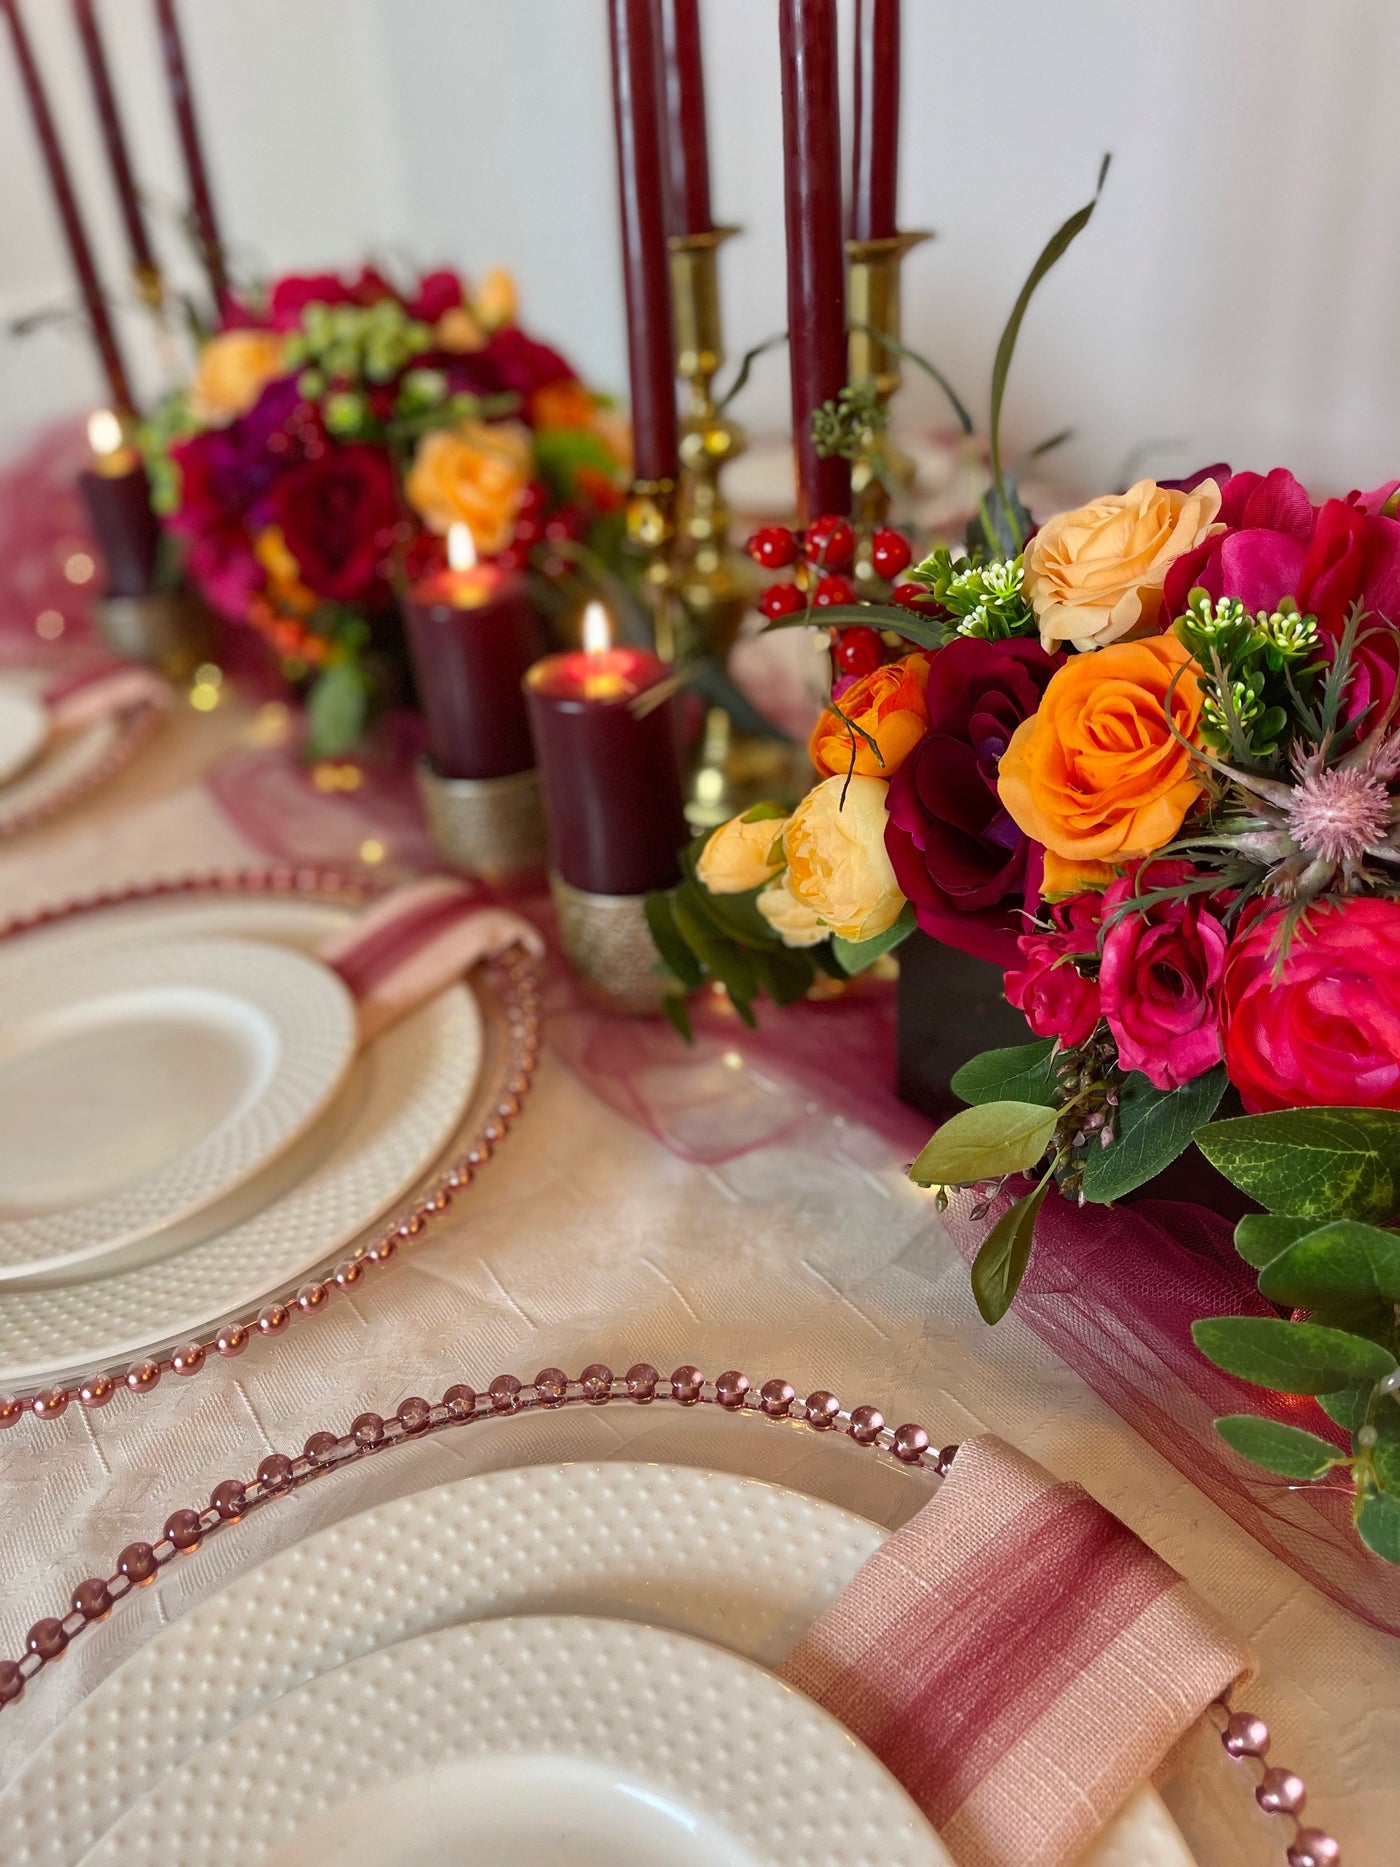 Rent a Rose- Centrepiece- Orange, Burgundy, and Fuchsia- flowers with Olive green berries rent for five days for $54.00.